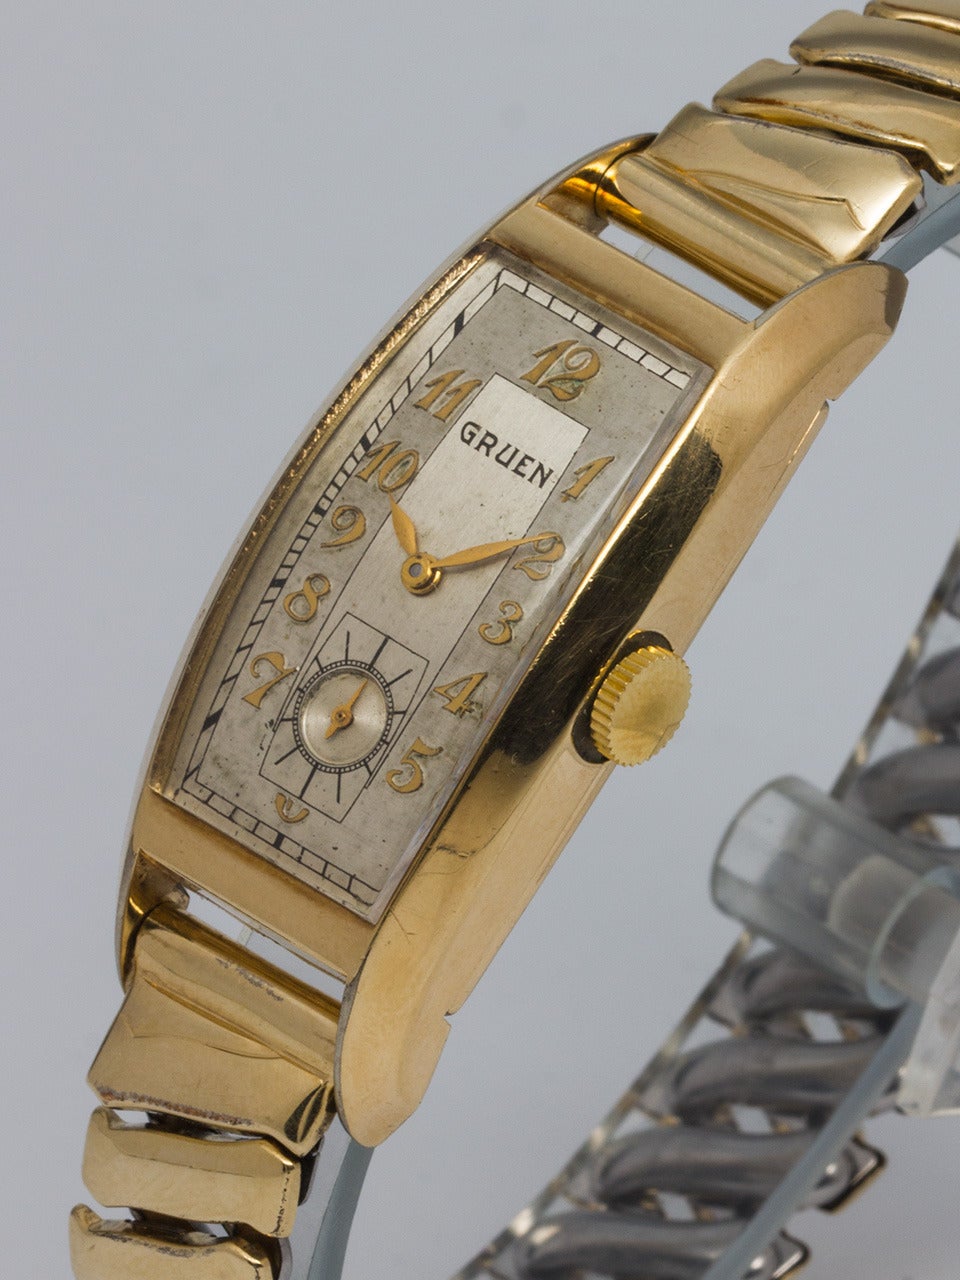 Gruen Yellow Gold-Filled Curvex Wristwatch, circa 1940s, with original two-tone silvered satin dial with raised gold Arabic indexes and gilt leaf hands. Powered by a 17-jewel manual-wind movement with subsidiary seconds. Long and narrow tapered